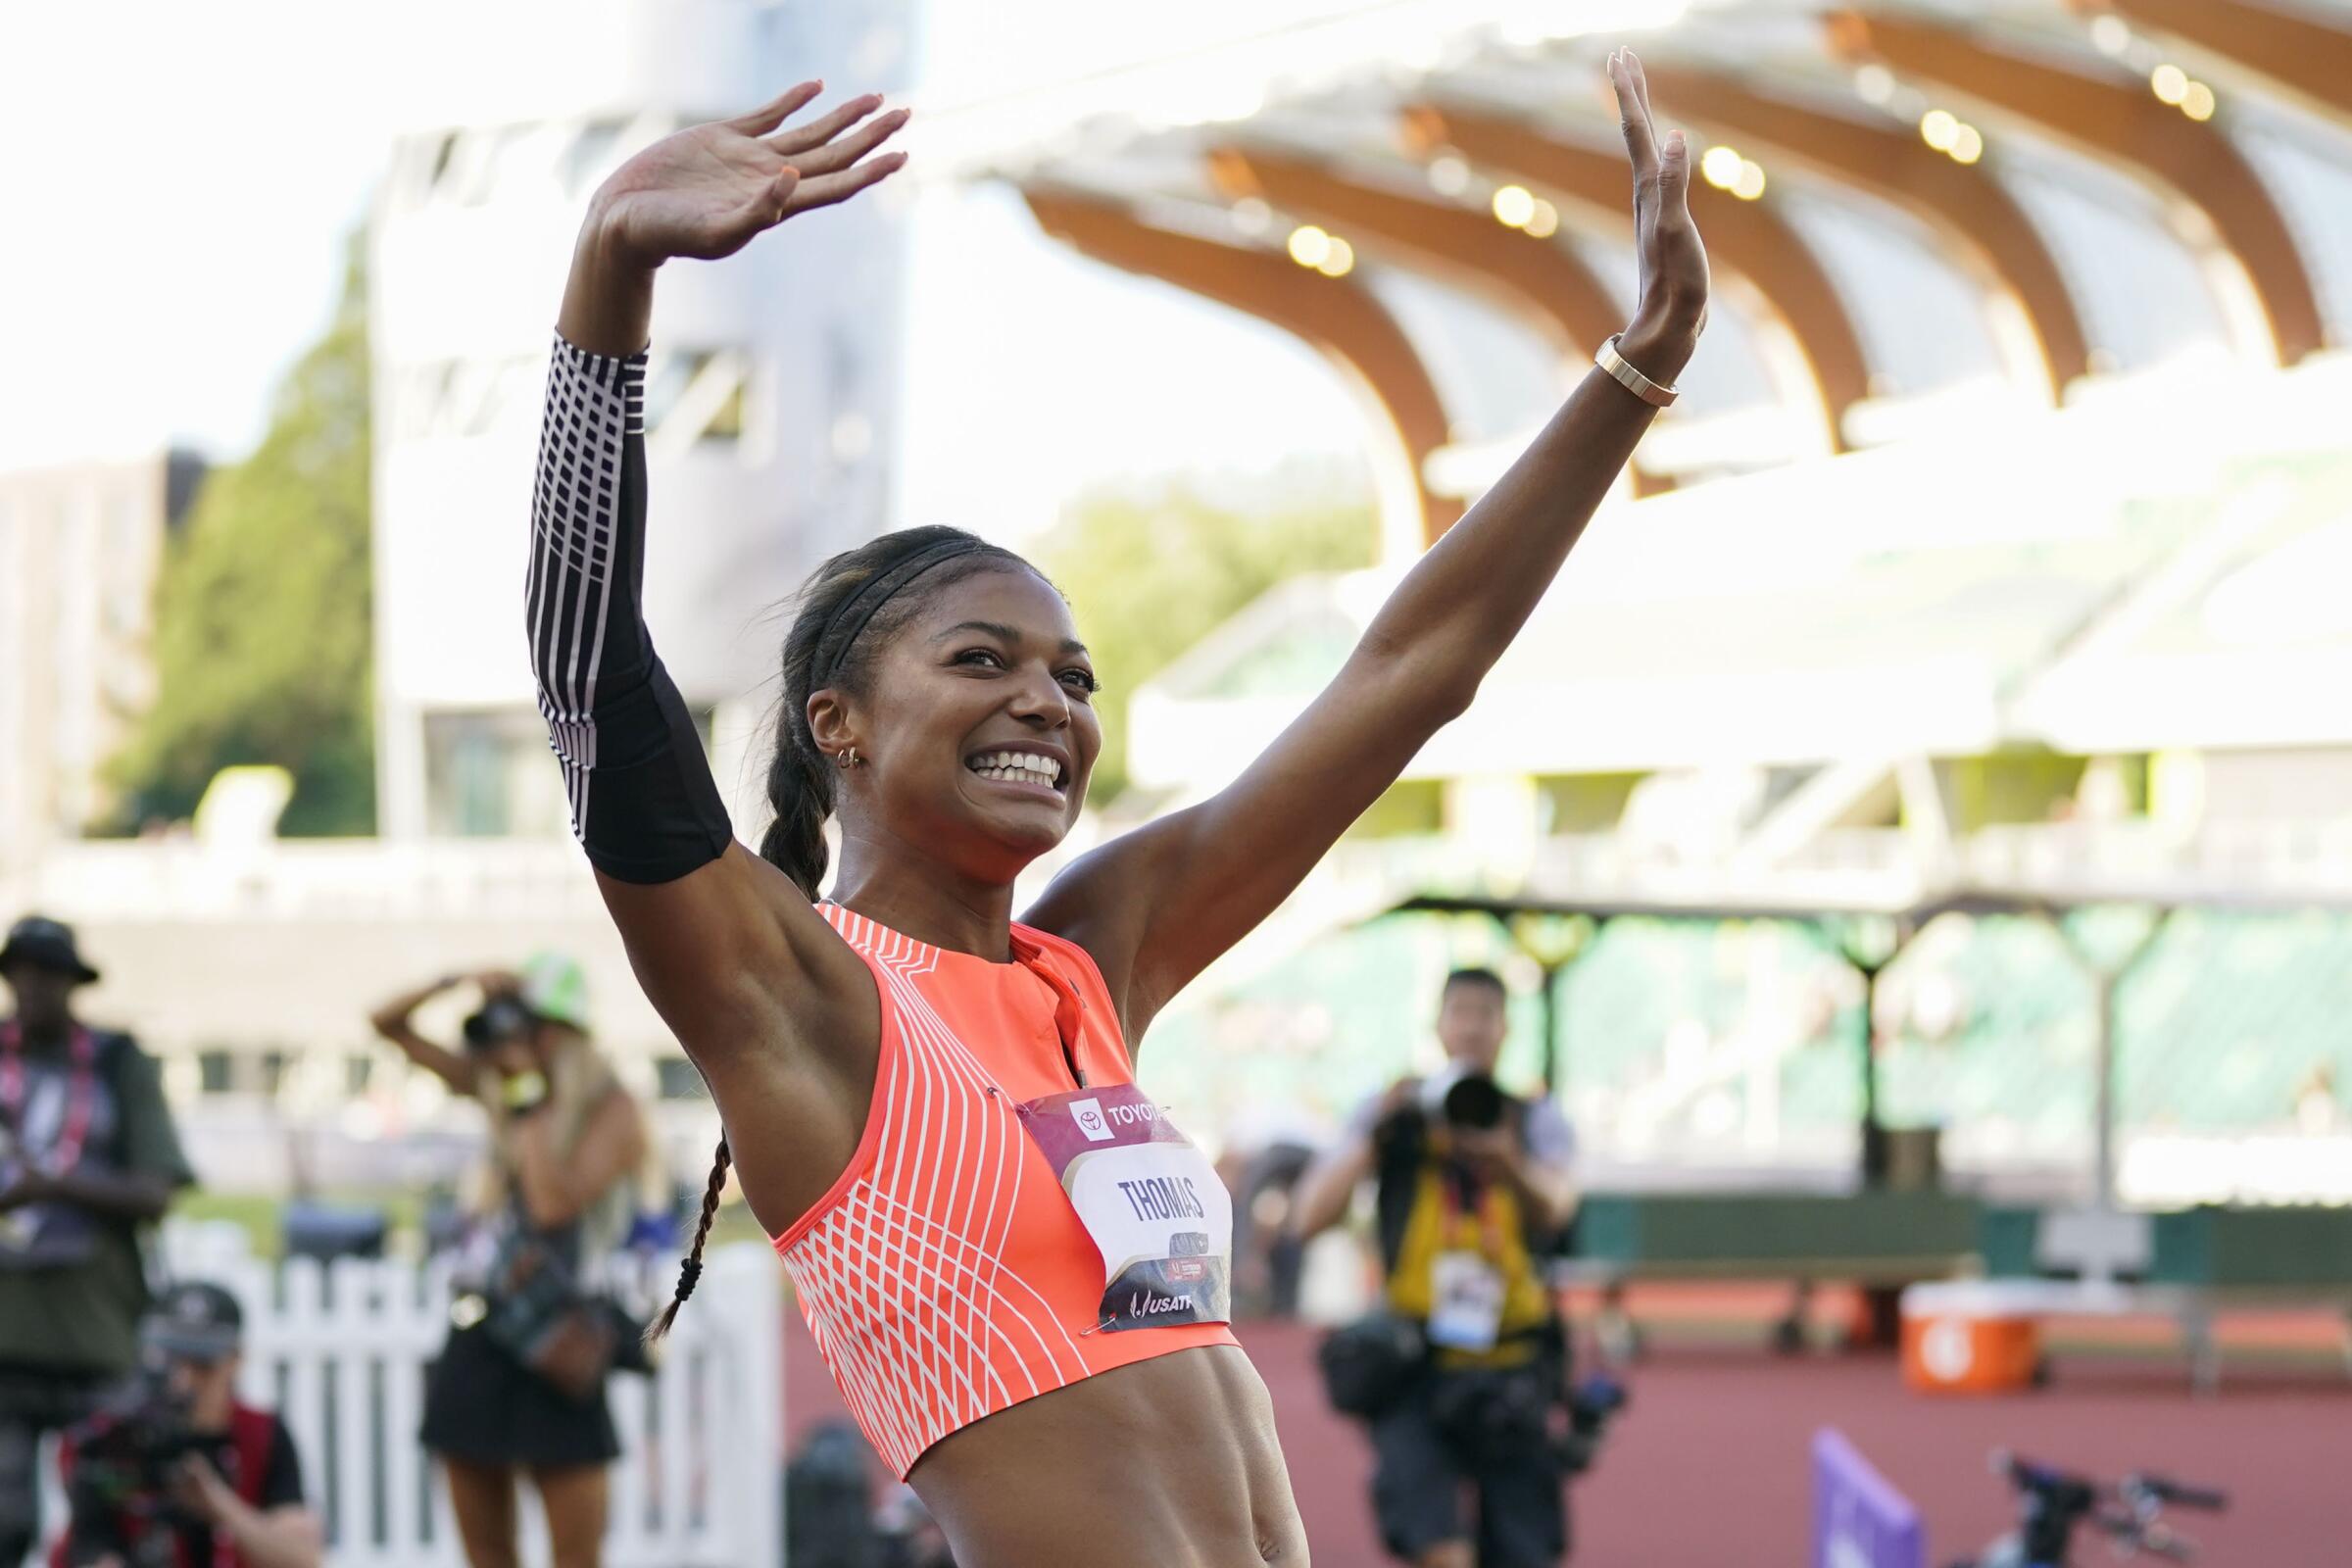 Gabby Thomas waves to spectators after winning the gold medal in the 200-meter dash at the U.S. track and field championships